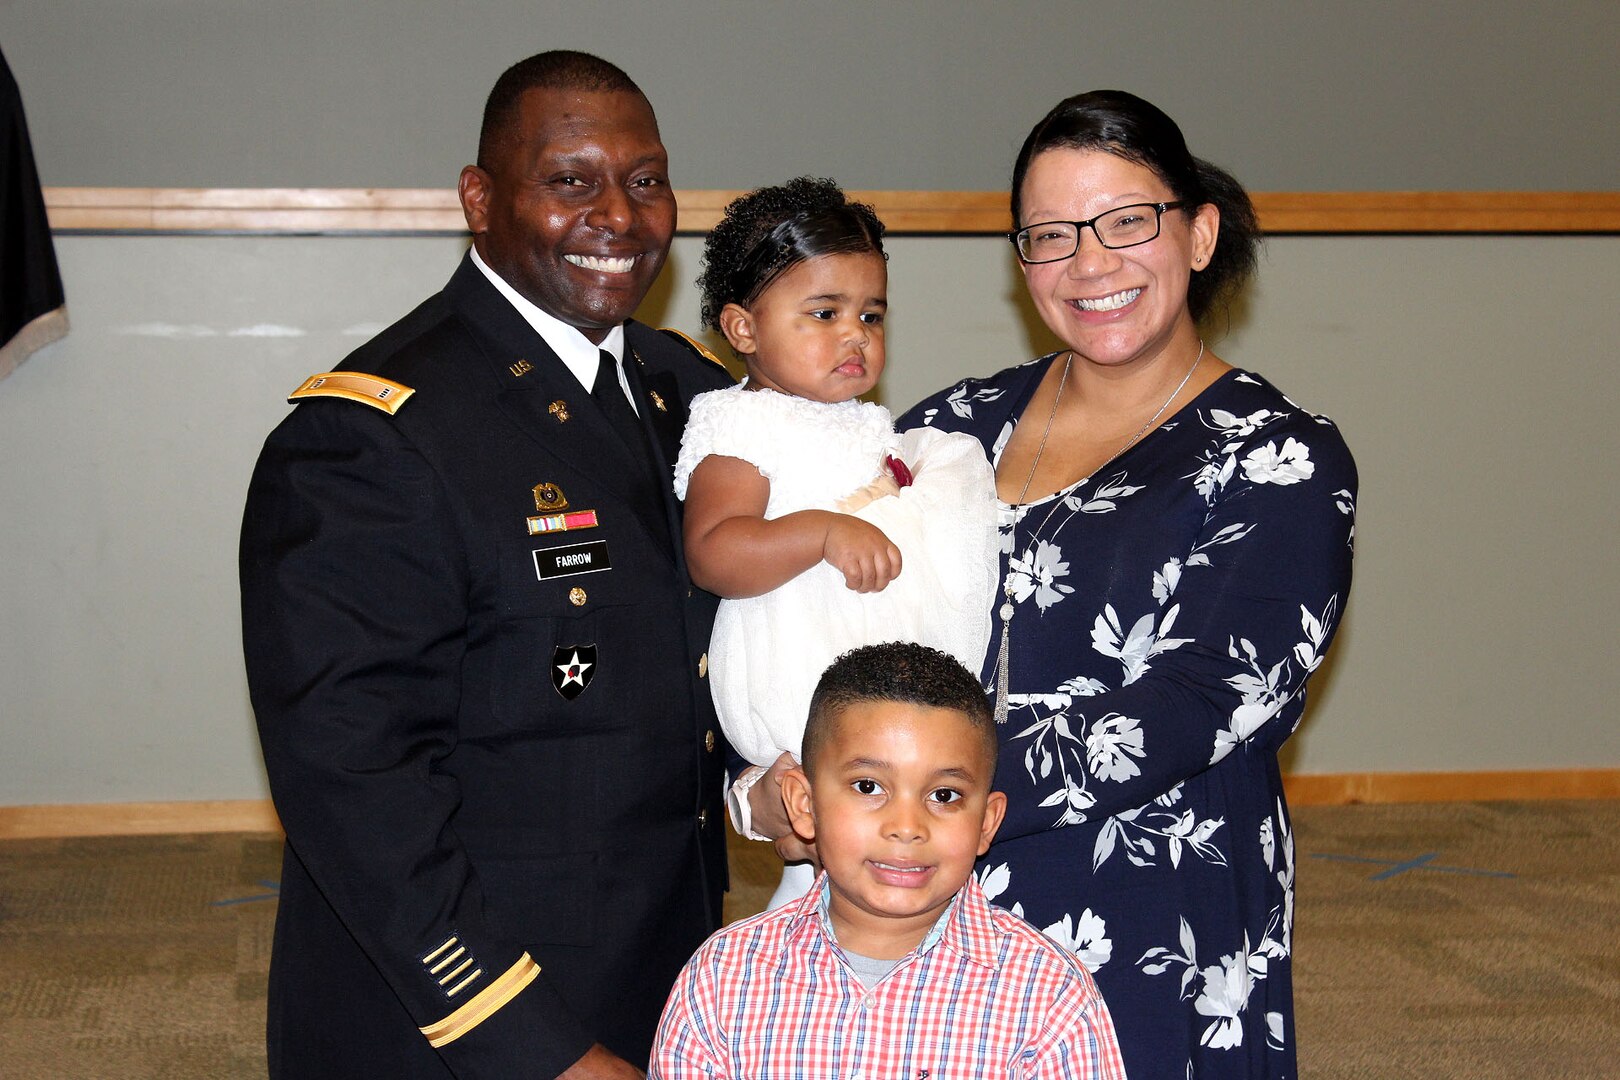 A family poses together after an Army ceremony.